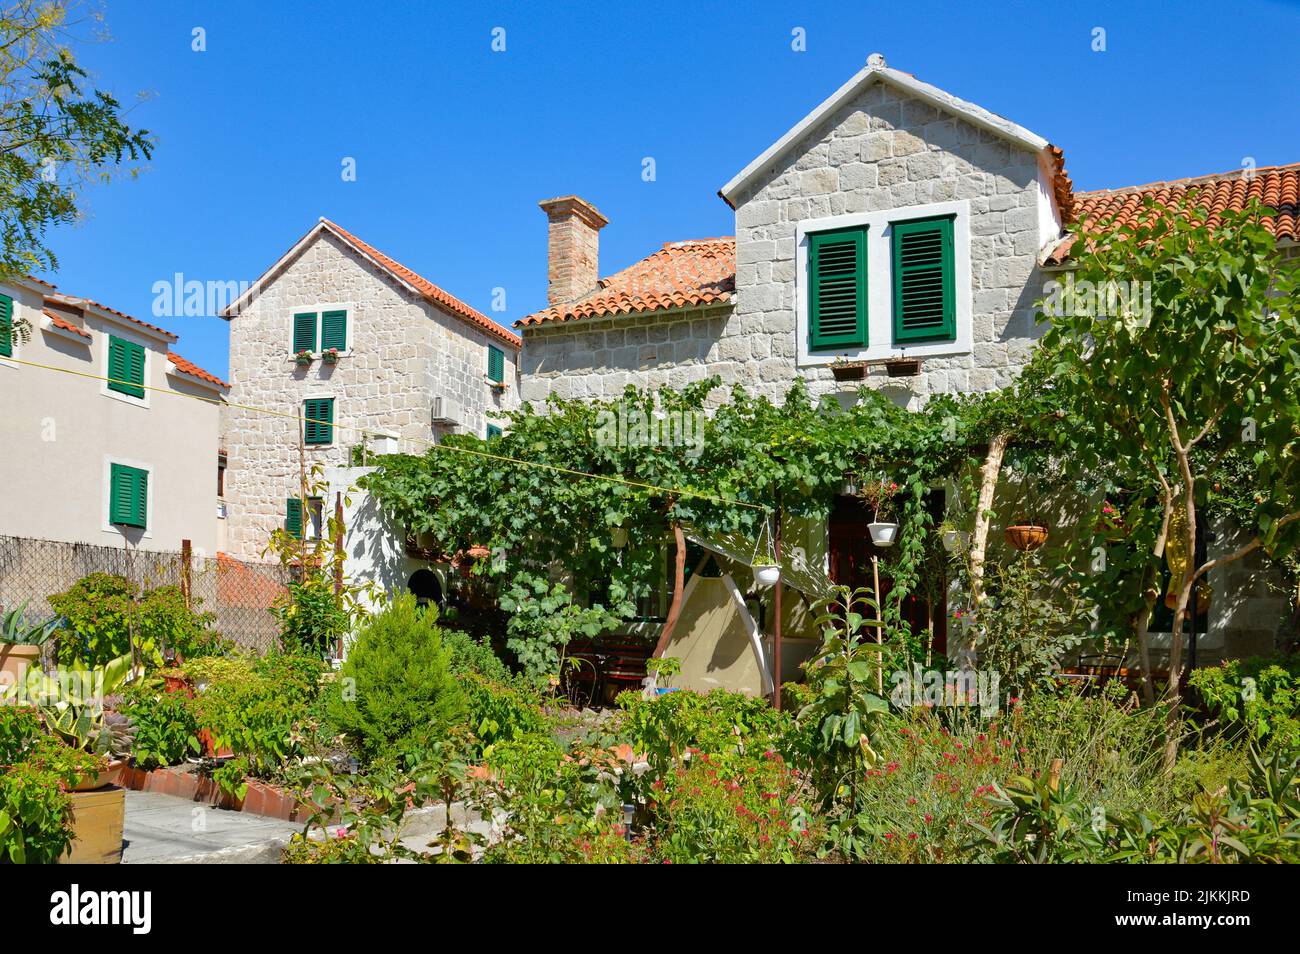 A beautiful stone house decorated with plants in Split, Croatia Stock Photo